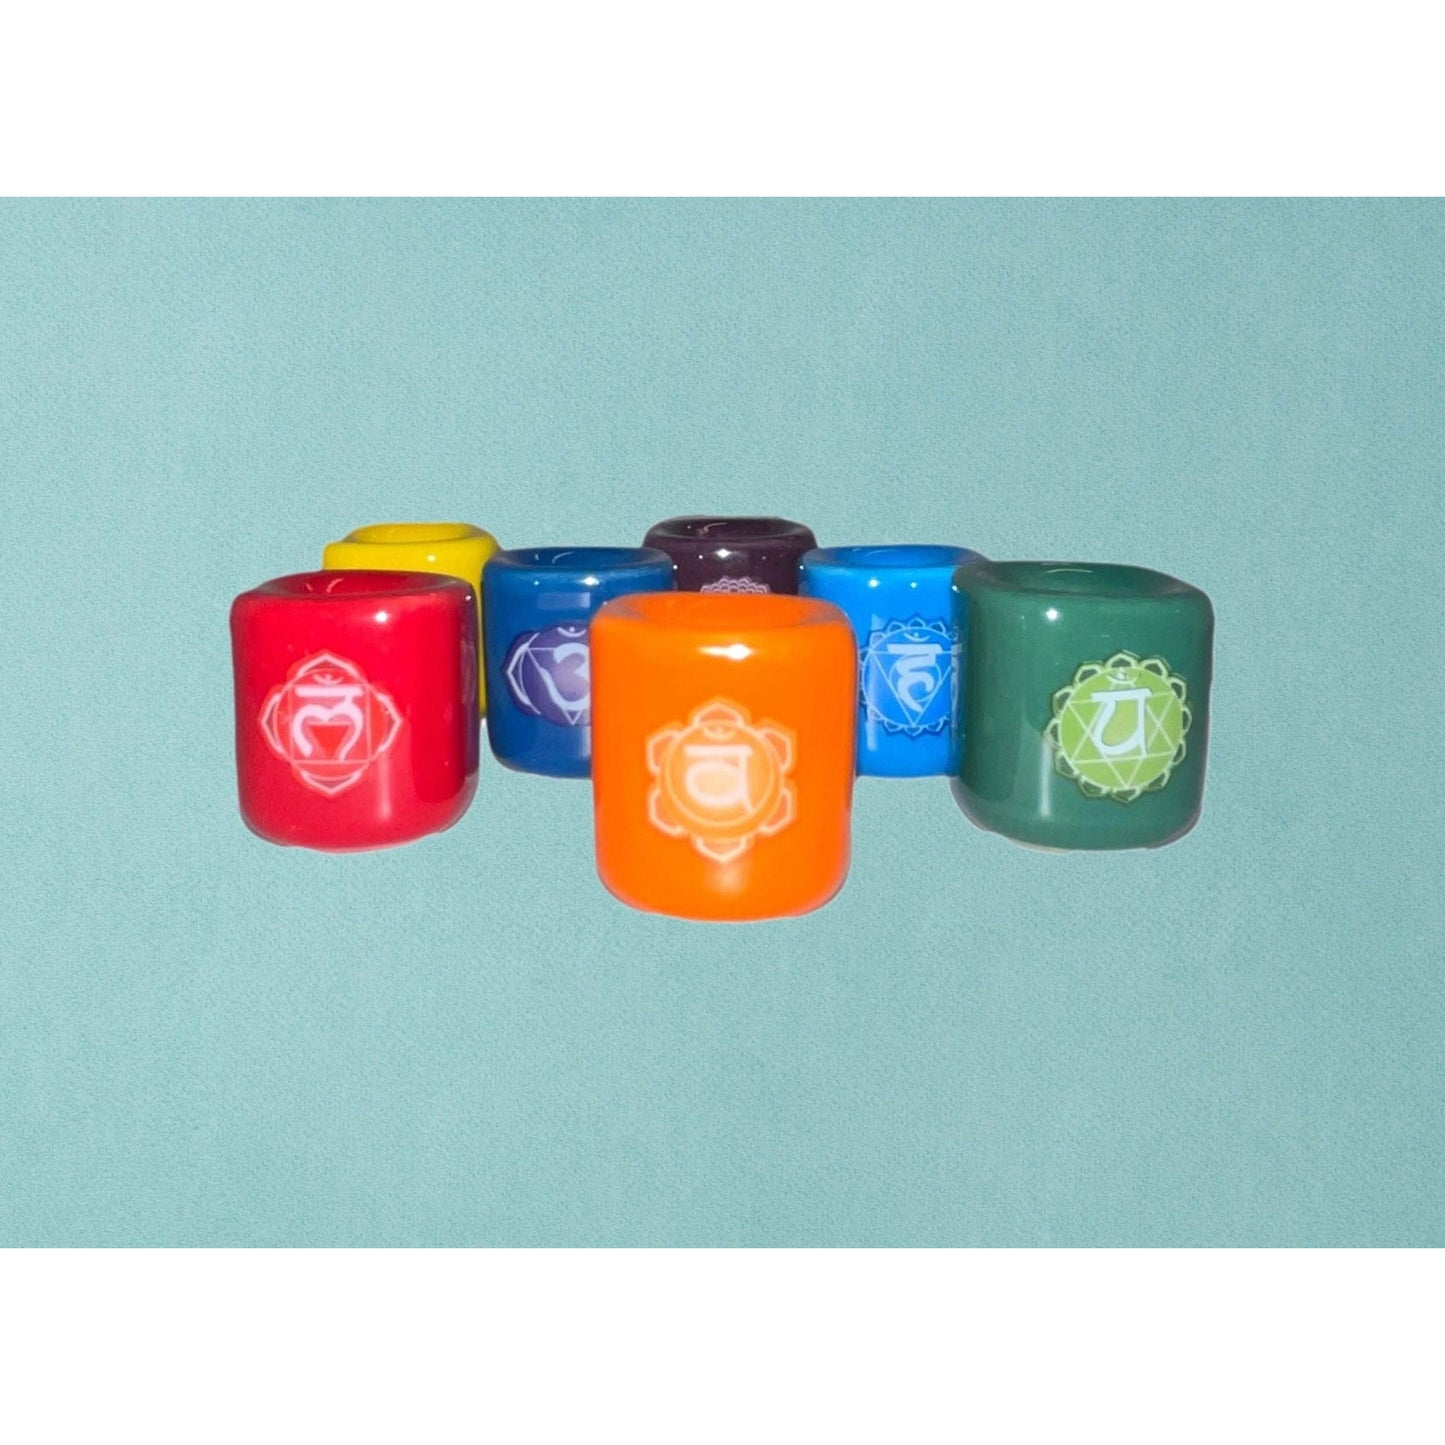 Chakra Spell Chime Candle Holder